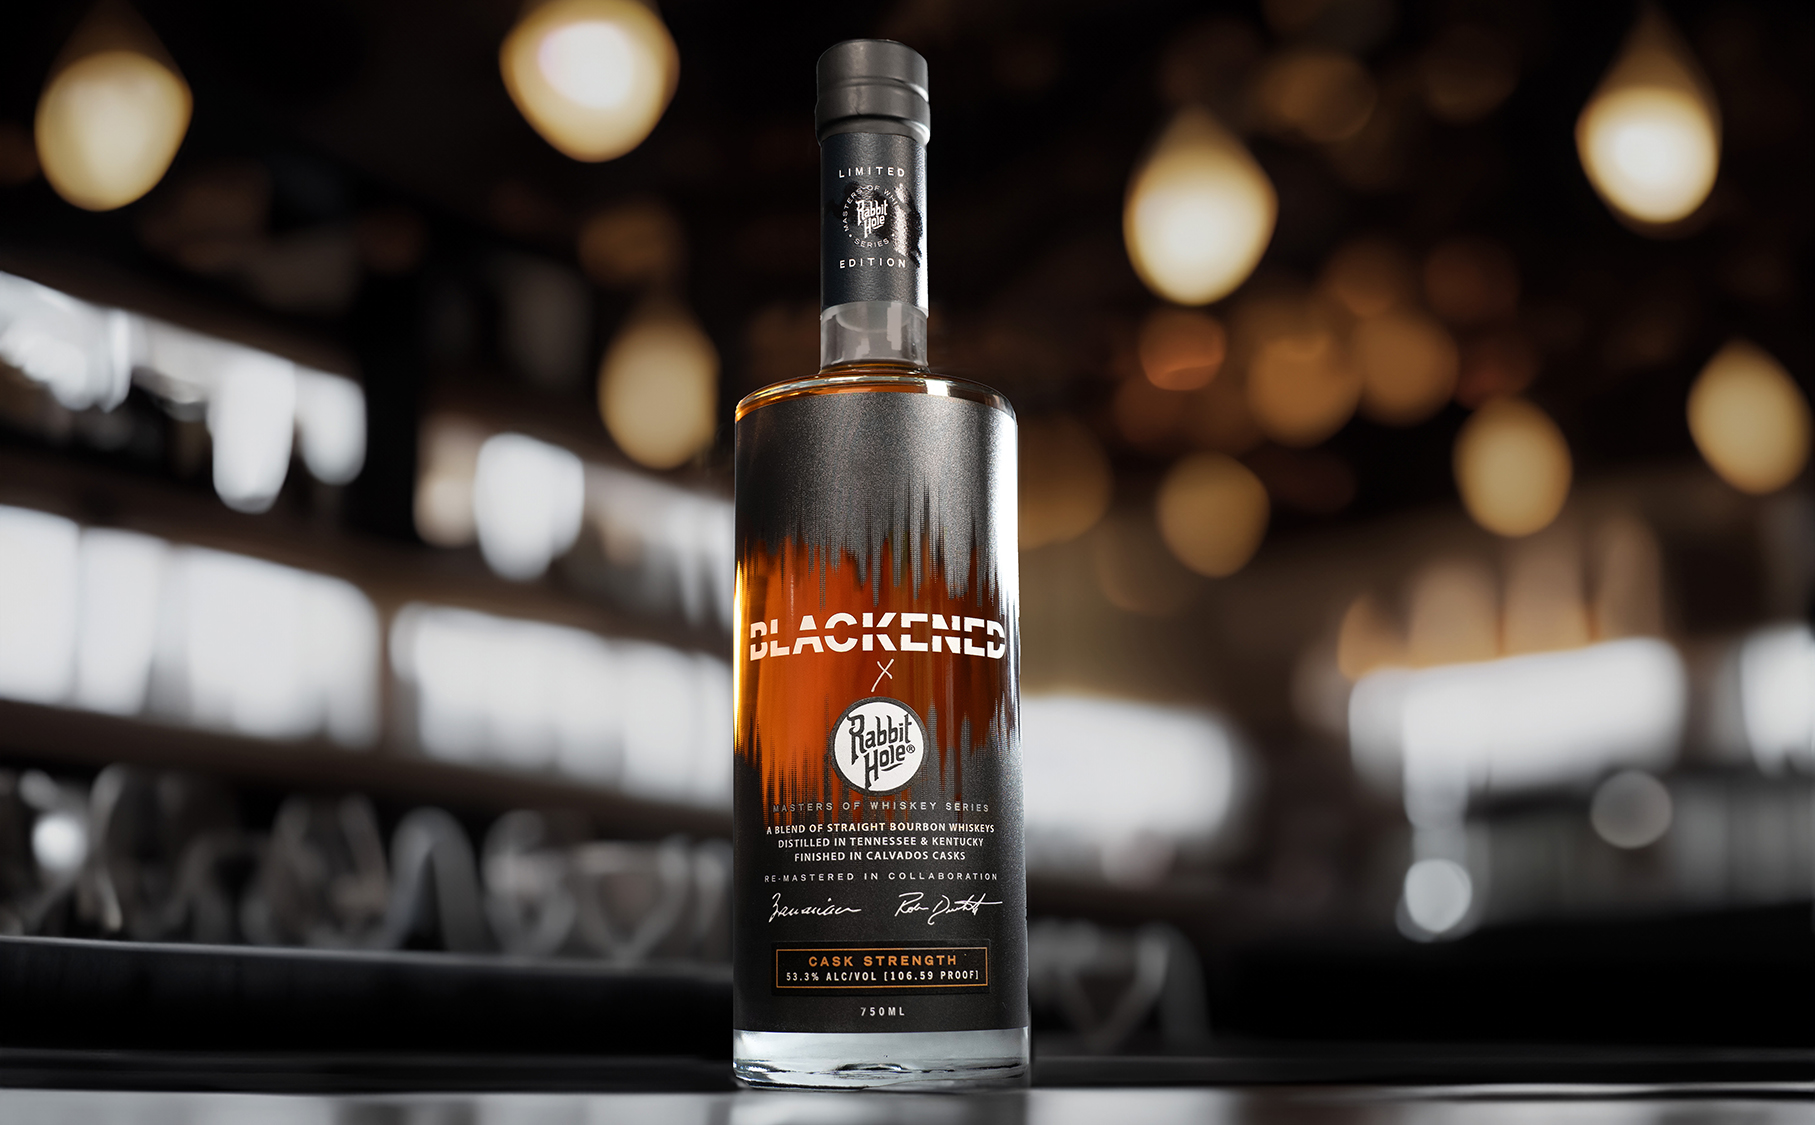 Blackened Whiskey Teams Up With Rabbit Hole For 2023 “Masters Of Whiskey Series” Release